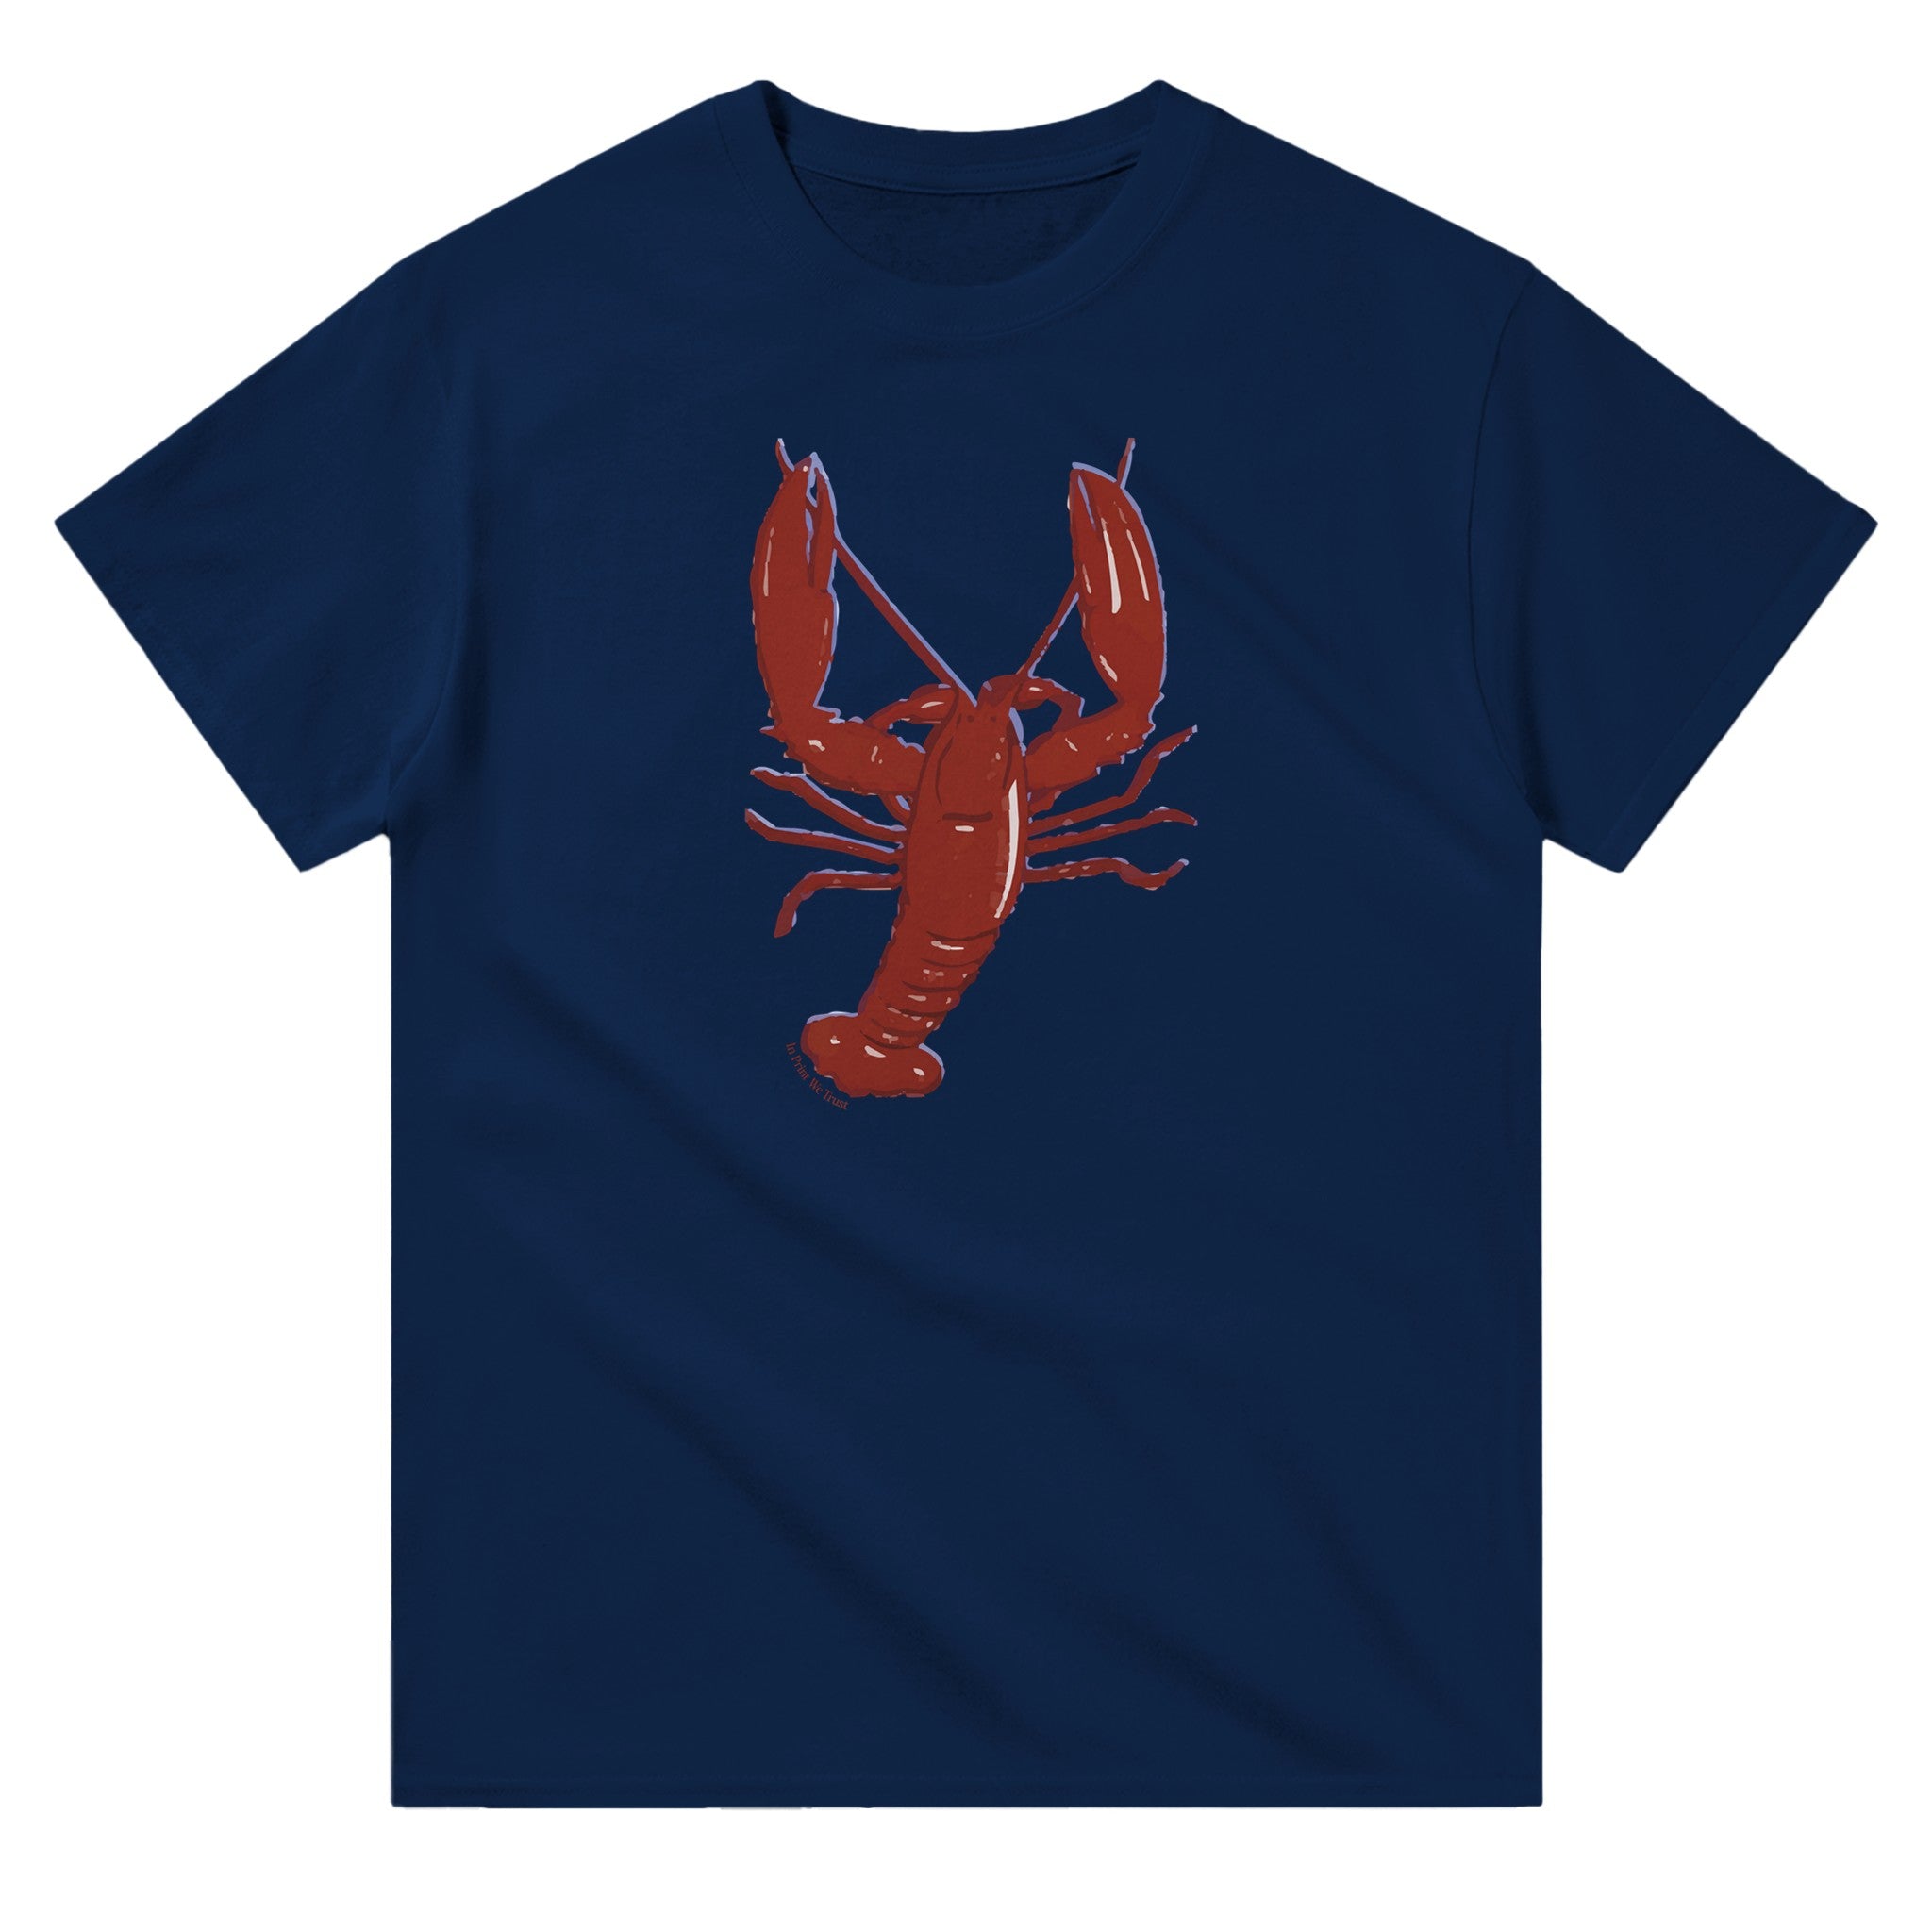 'You're My Lobster' classic tee - In Print We Trust